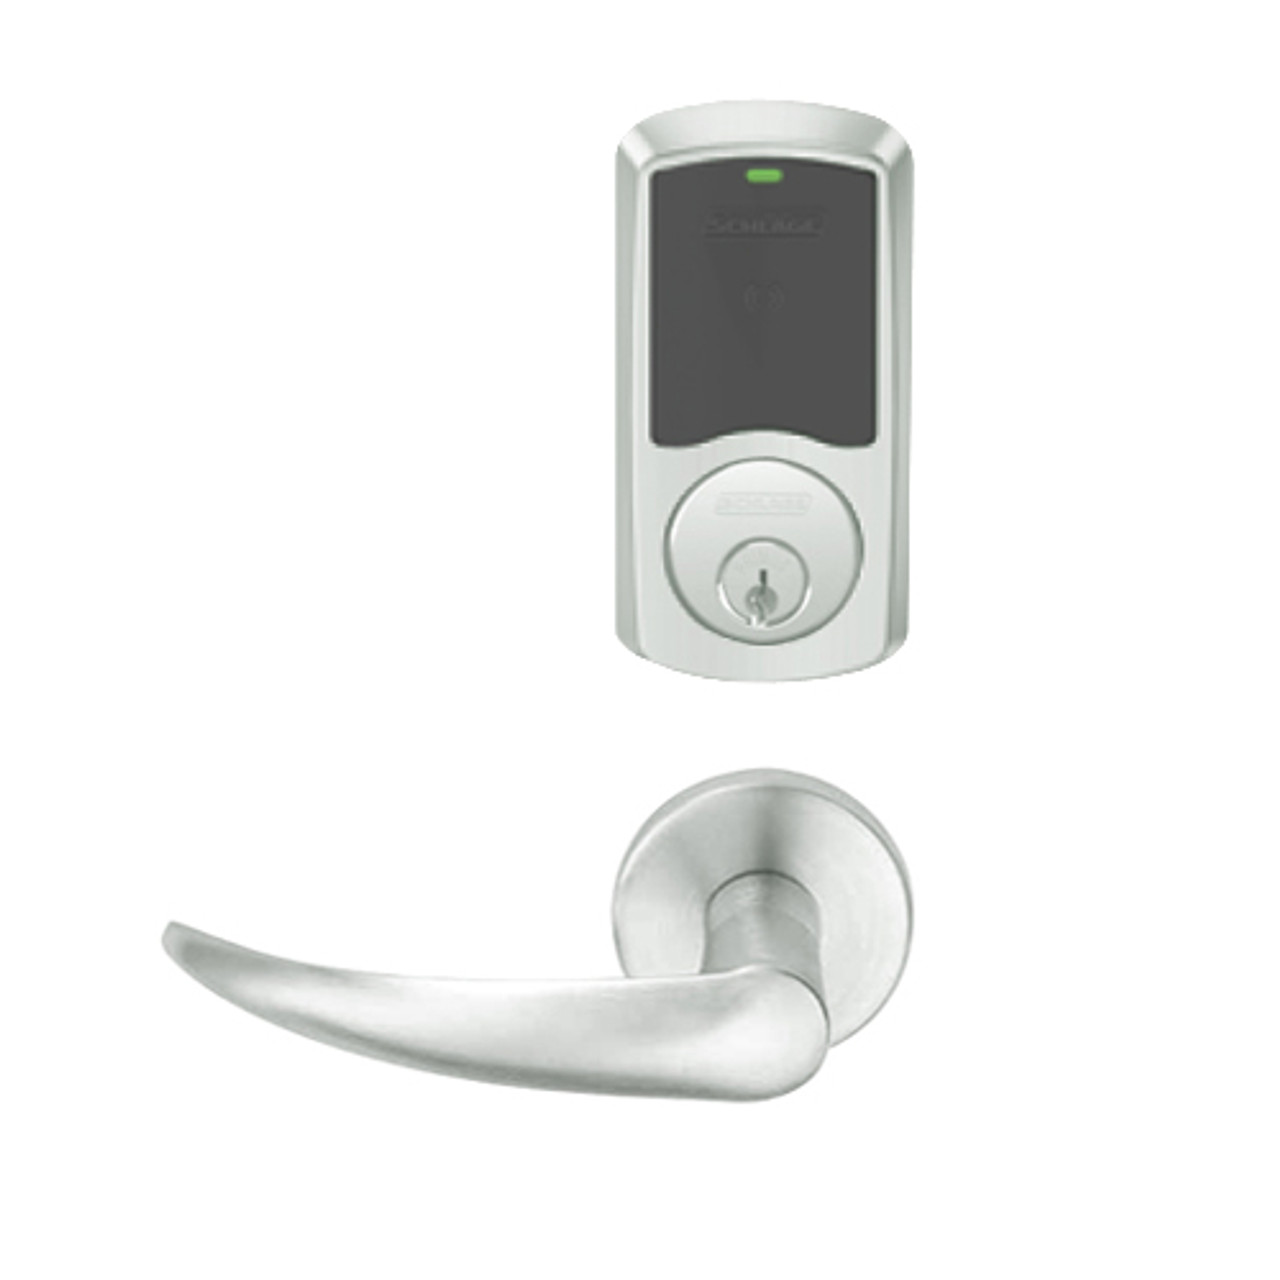 LEMD-GRW-P-OME-619-00A Schlage Privacy/Apartment Wireless Greenwich Mortise Deadbolt Lock with LED and Omega Lever in Satin Nickel